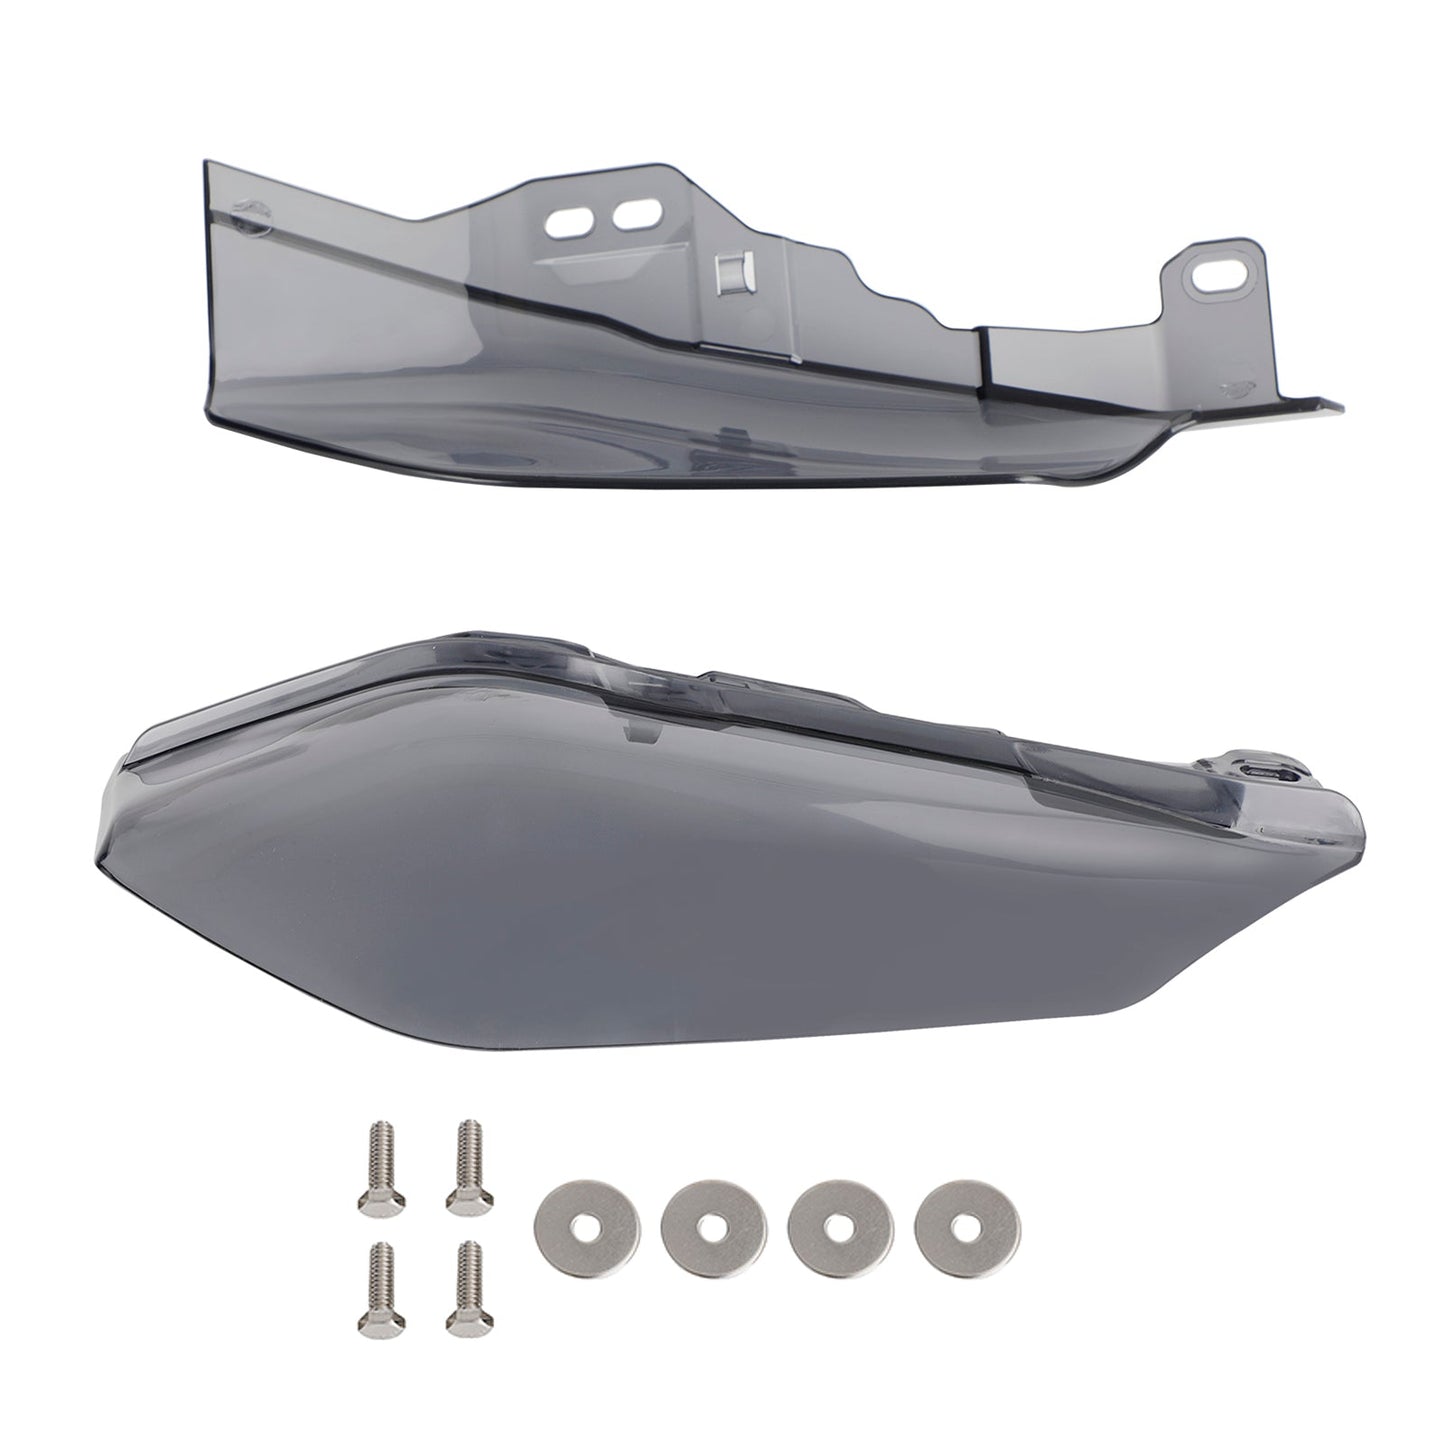 Mid-Frame Air Heat Deflector Trim Shield fit for Touring and Trike models 17-21